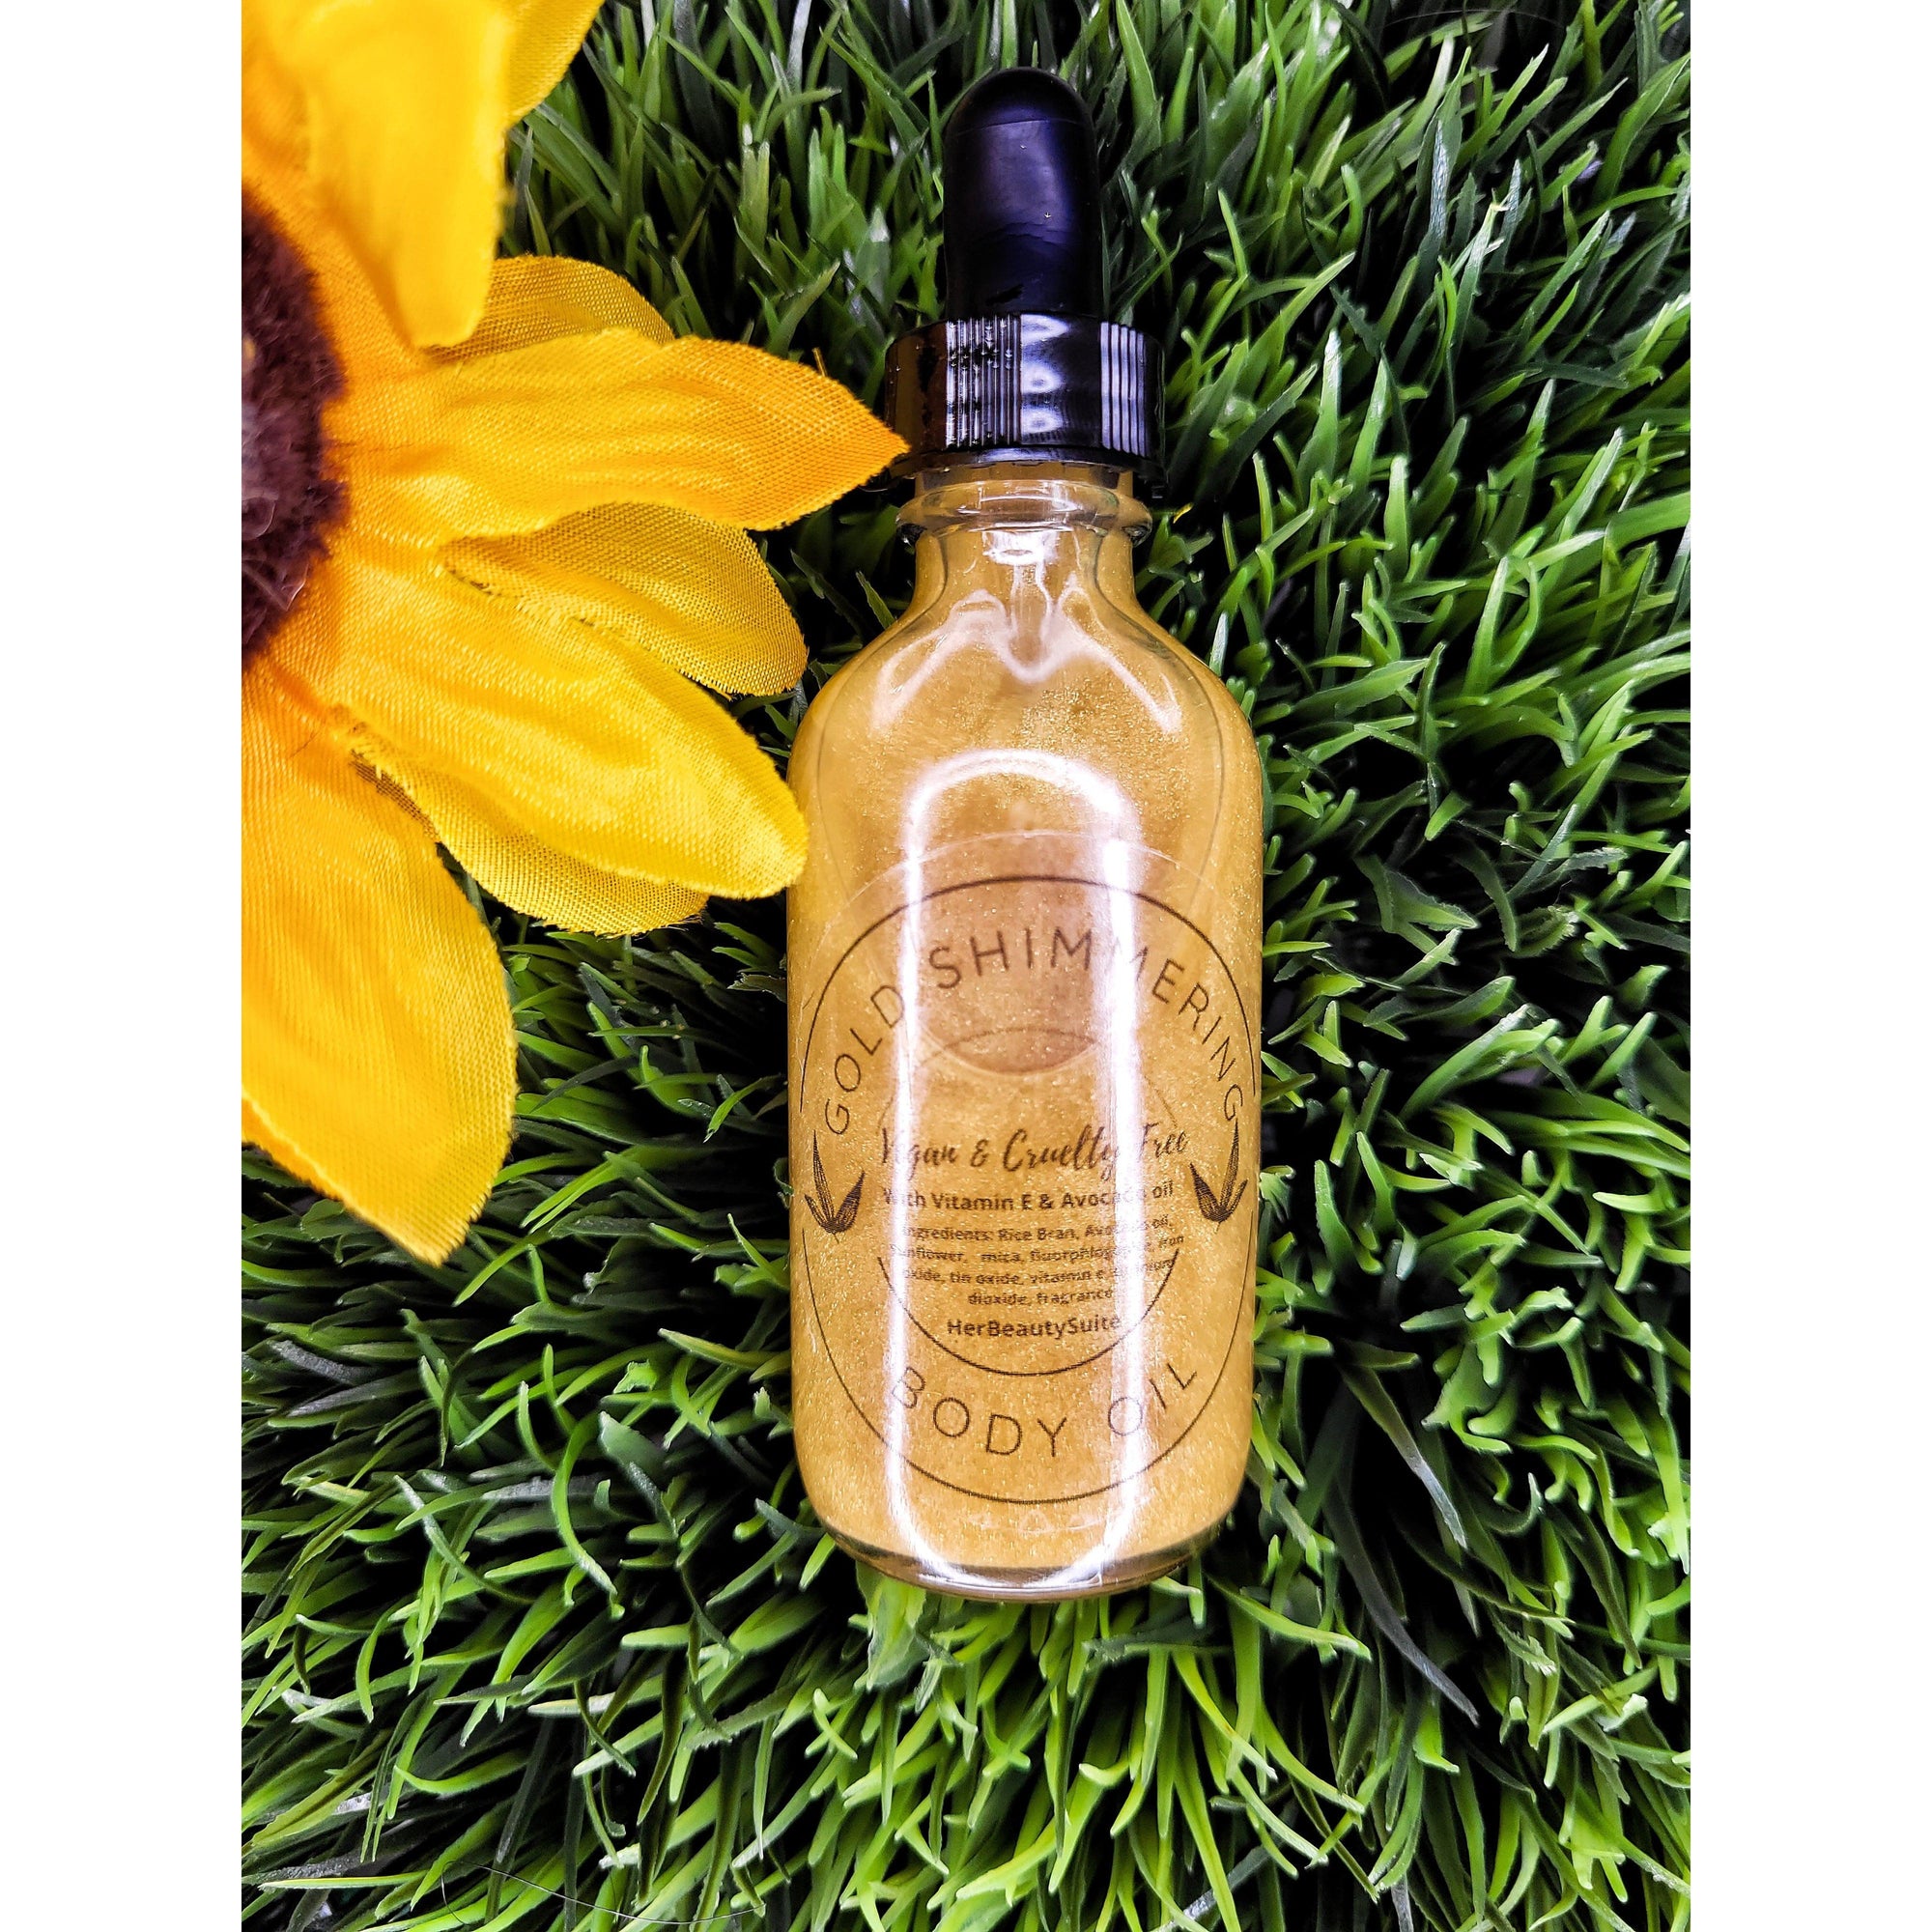 Goddess Glow Gold Shimmering Glow Body Oil- with Rice Bran, Vitamin E and Avocado oil Vegan & Cruelty Free